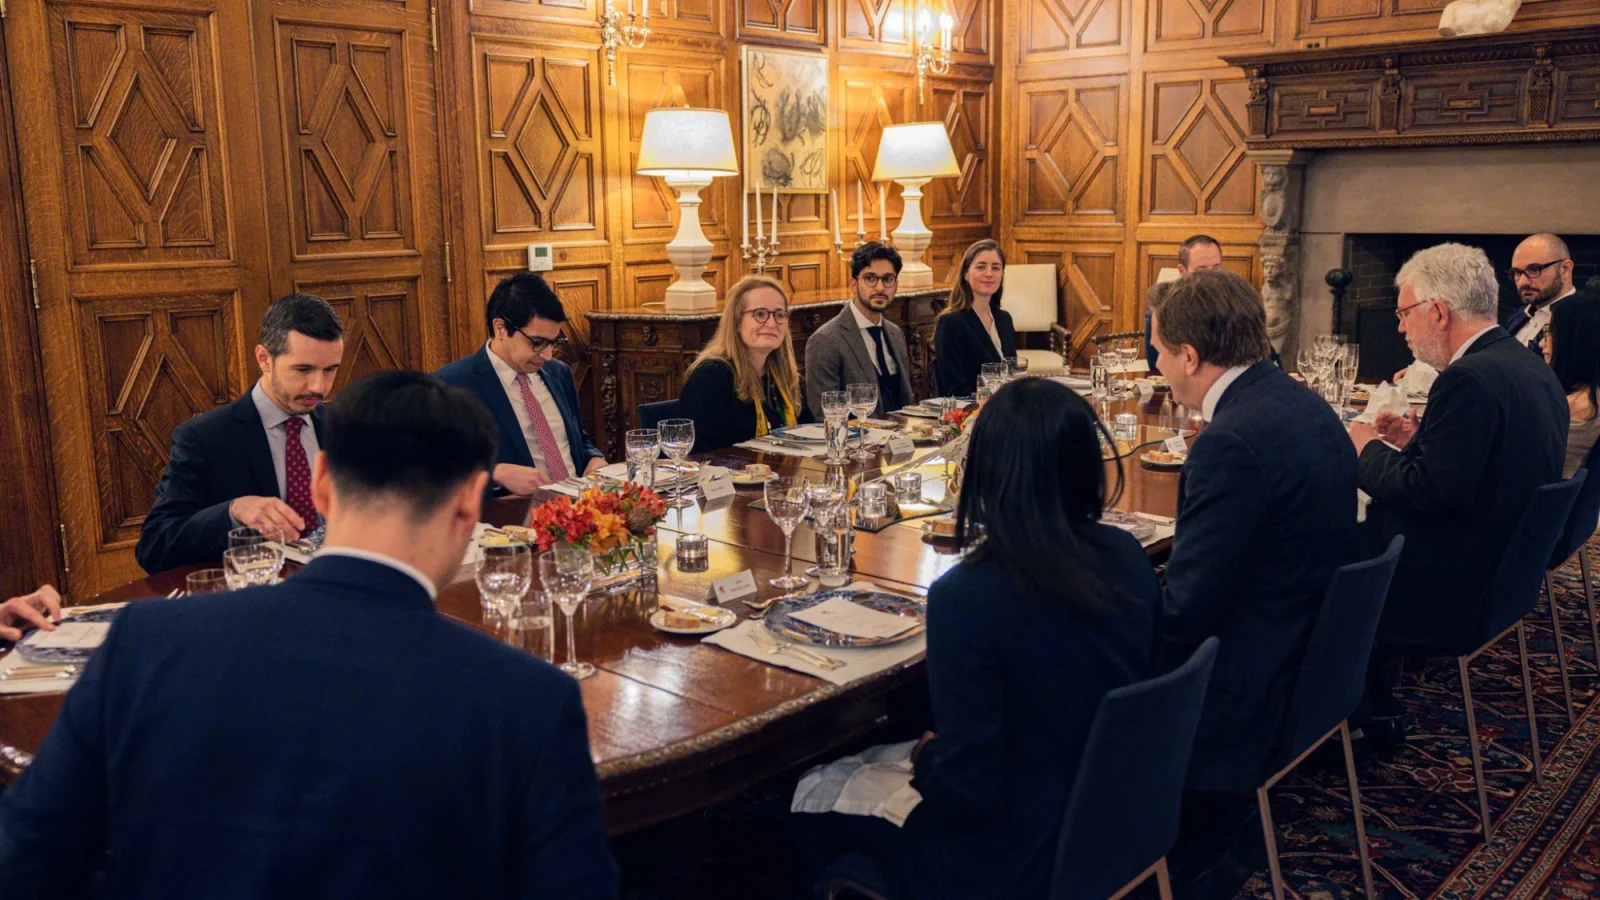 A group of graduate students dressed in suits sit around a dining room table in an elegant room.